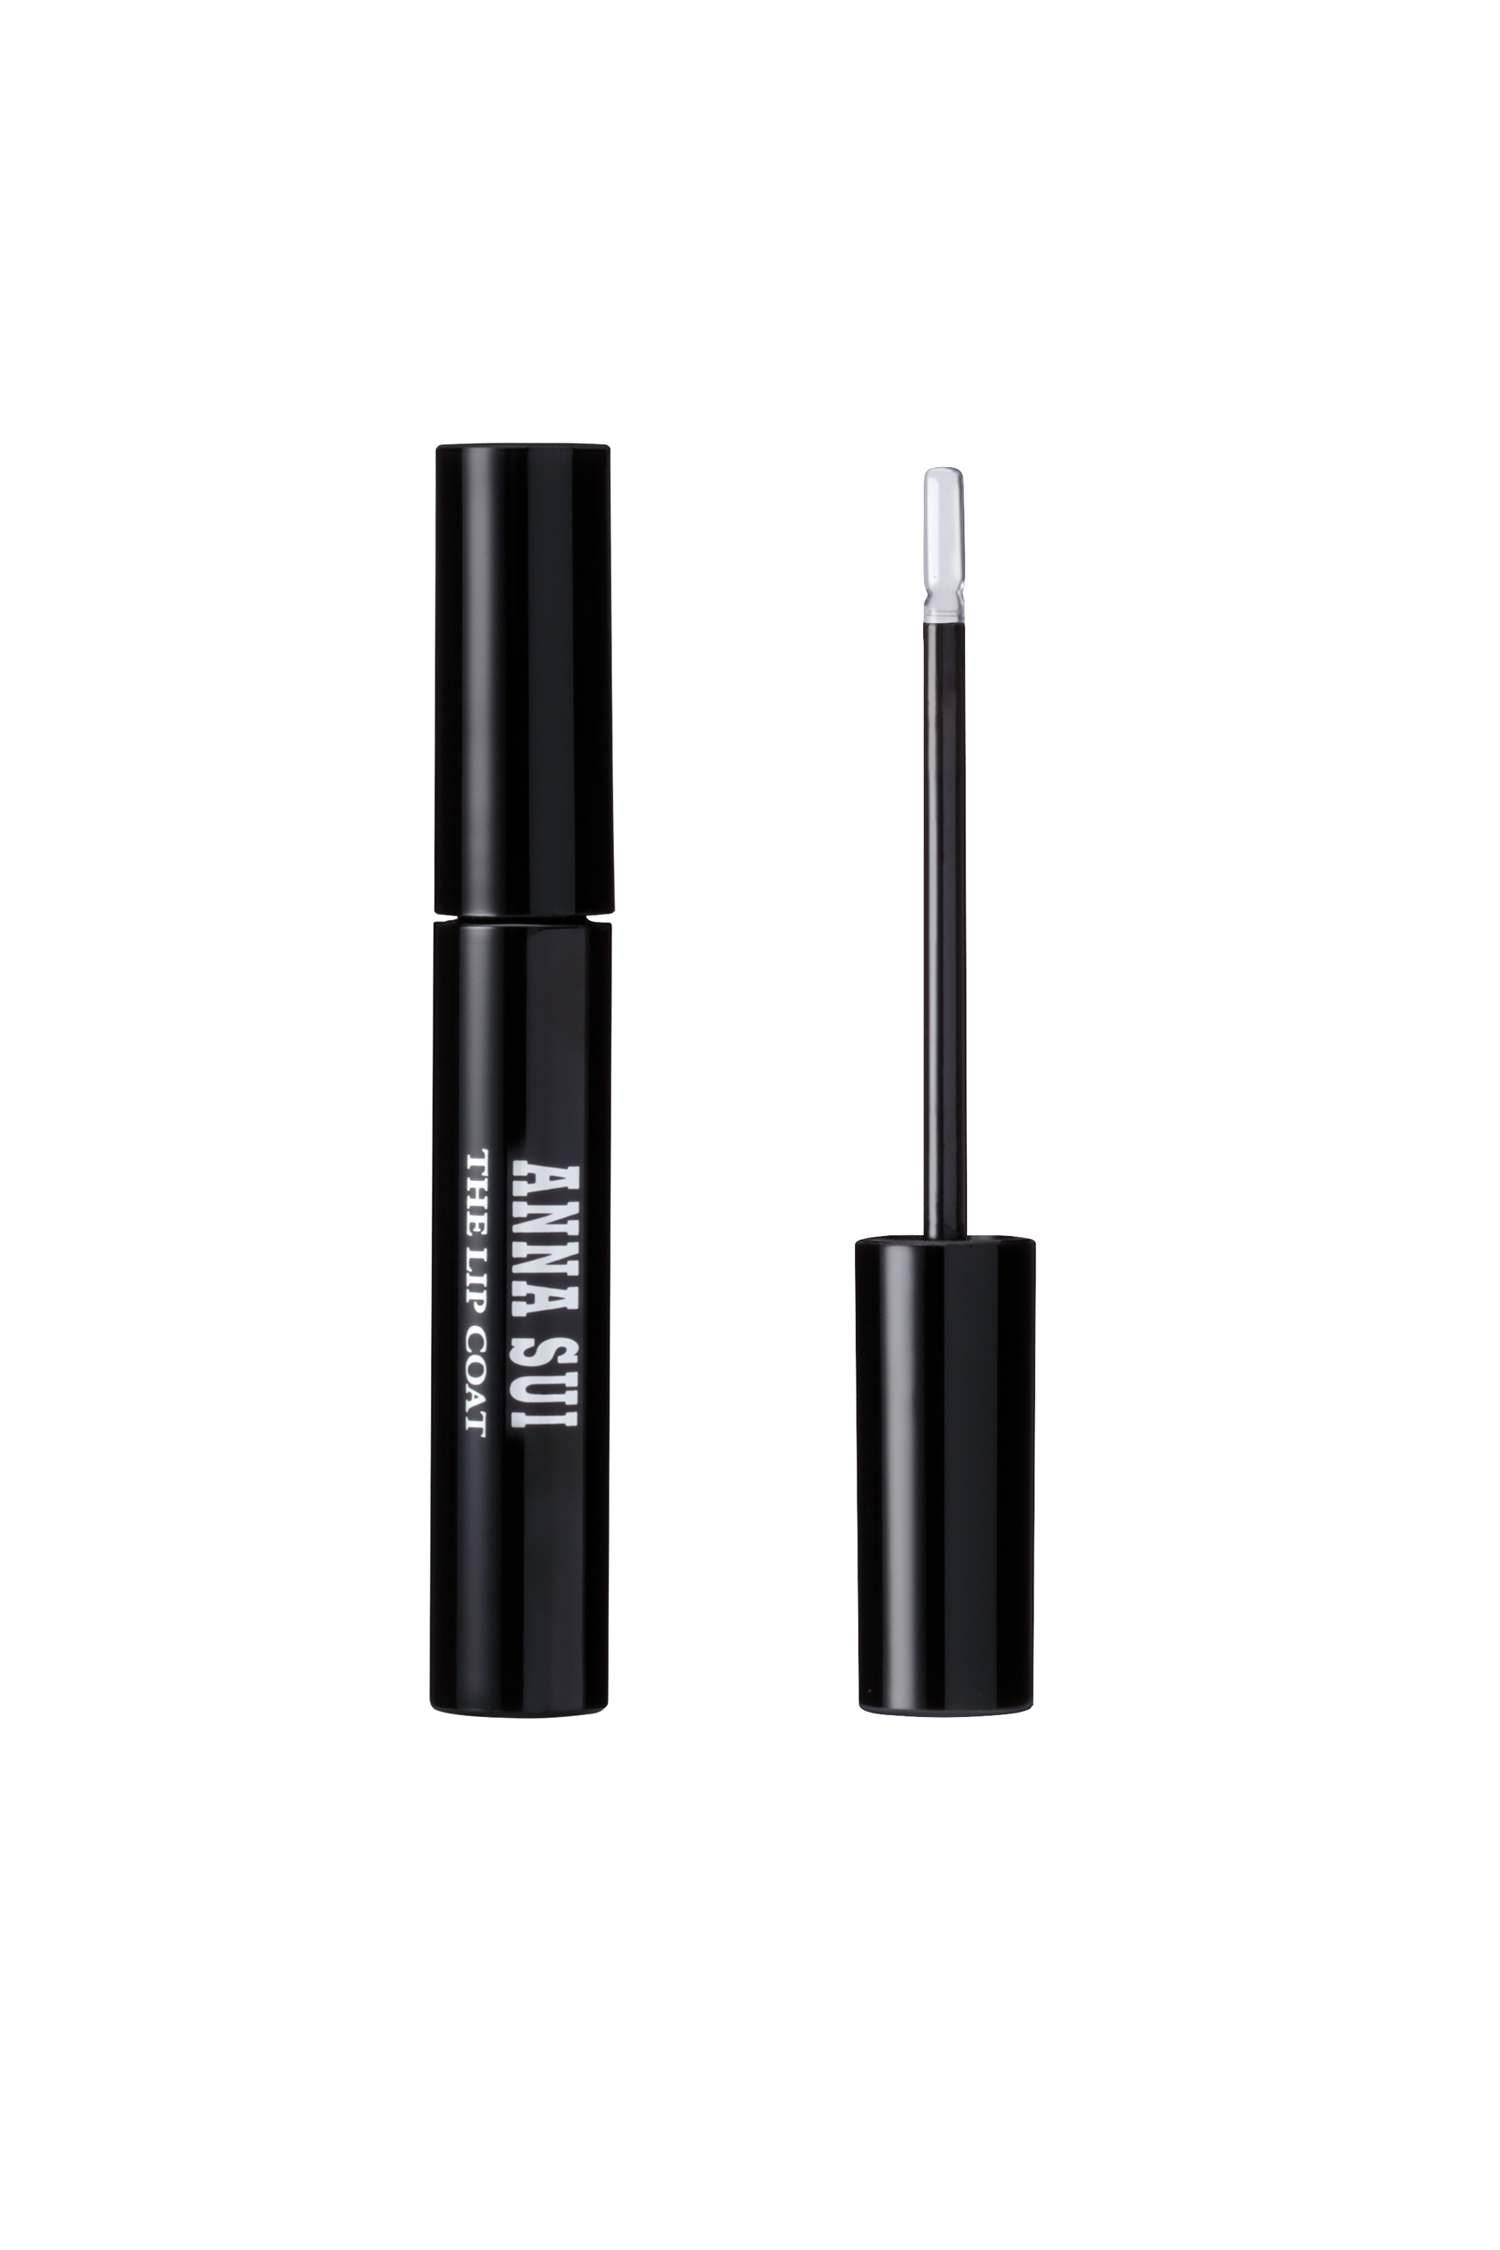 Lip coat, in a black cylindrical container, with white label Anna Sui, the Lip Coat brush on the side